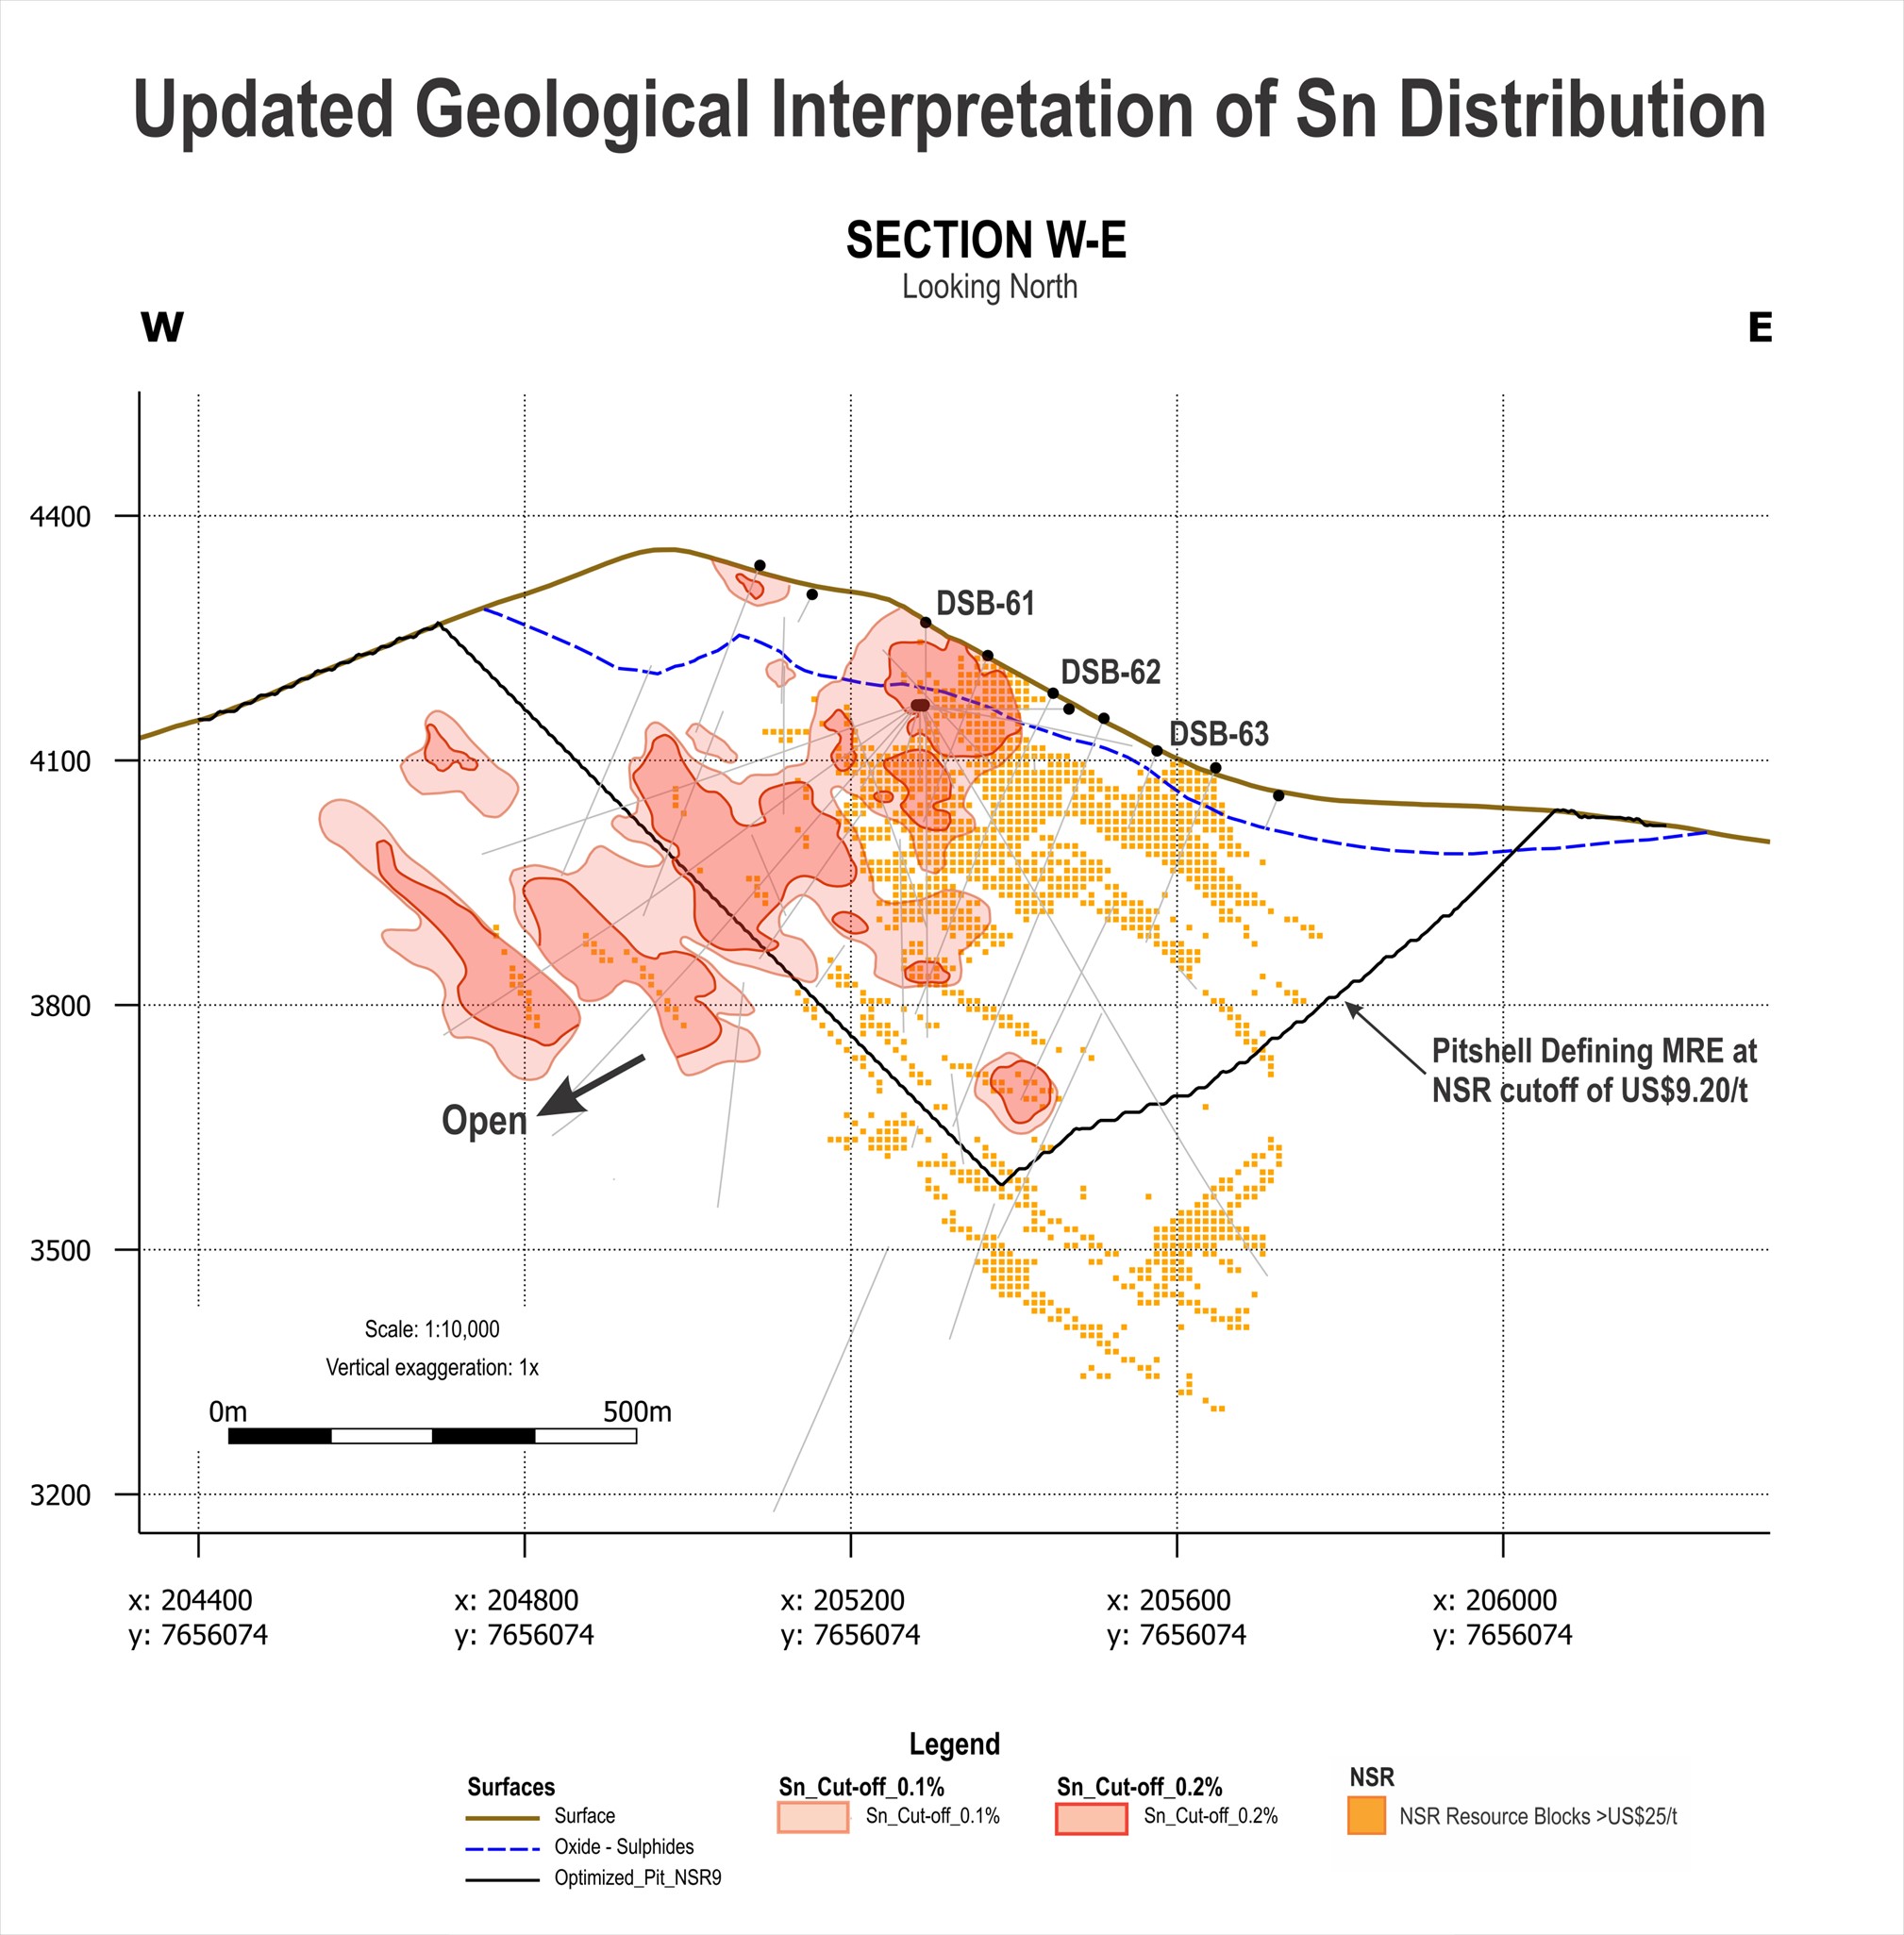 West-East Section showing Updated Geological Interpretation of Sn Distribution